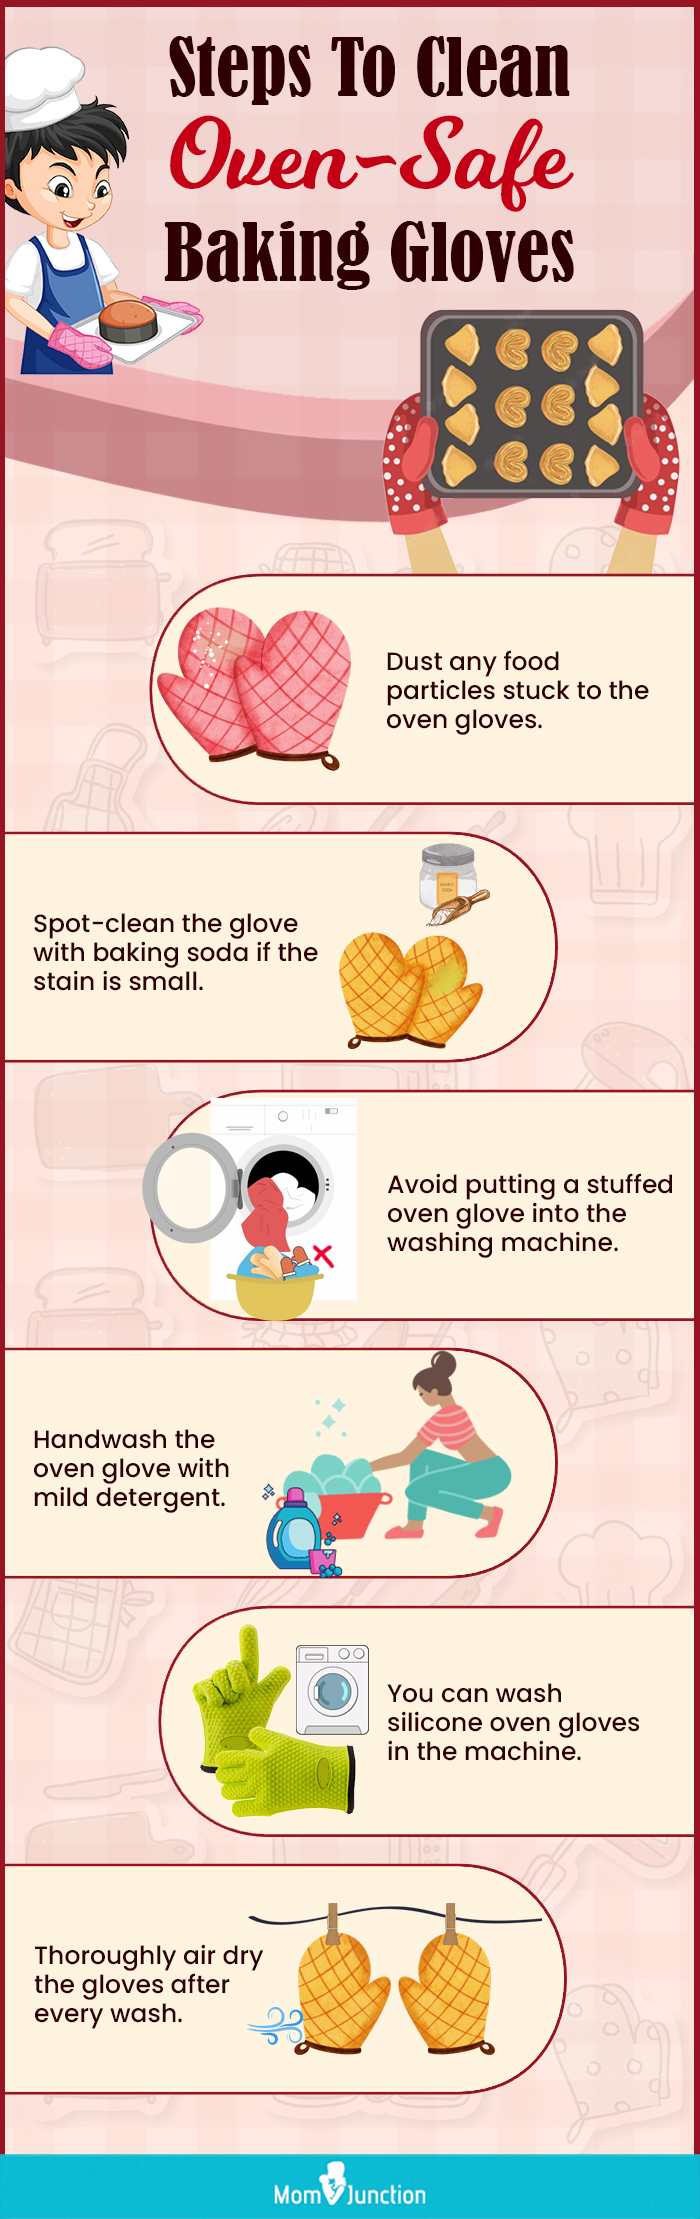 Steps To Clean Oven Safe Baking Gloves (Infographic)